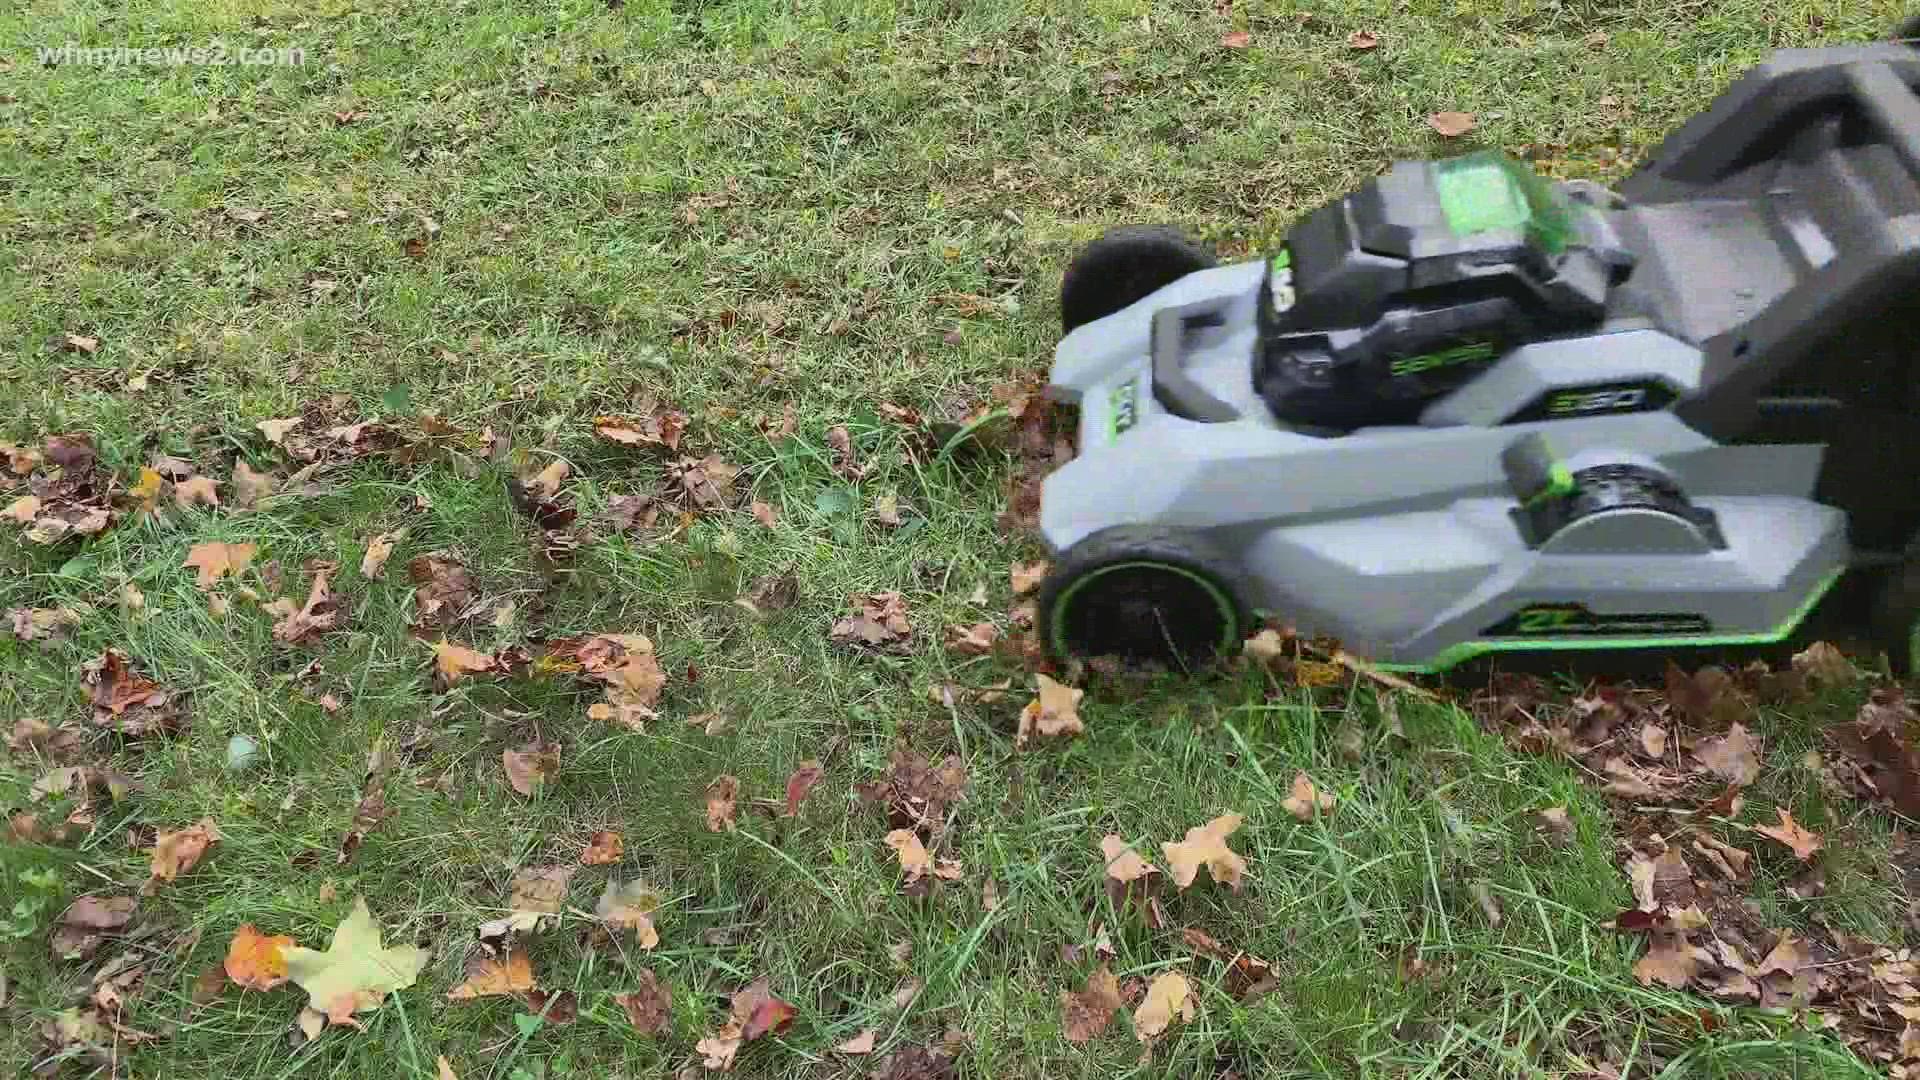 Consumer Reports said there’s a better way to tend to your lawn in the Fall than raking.